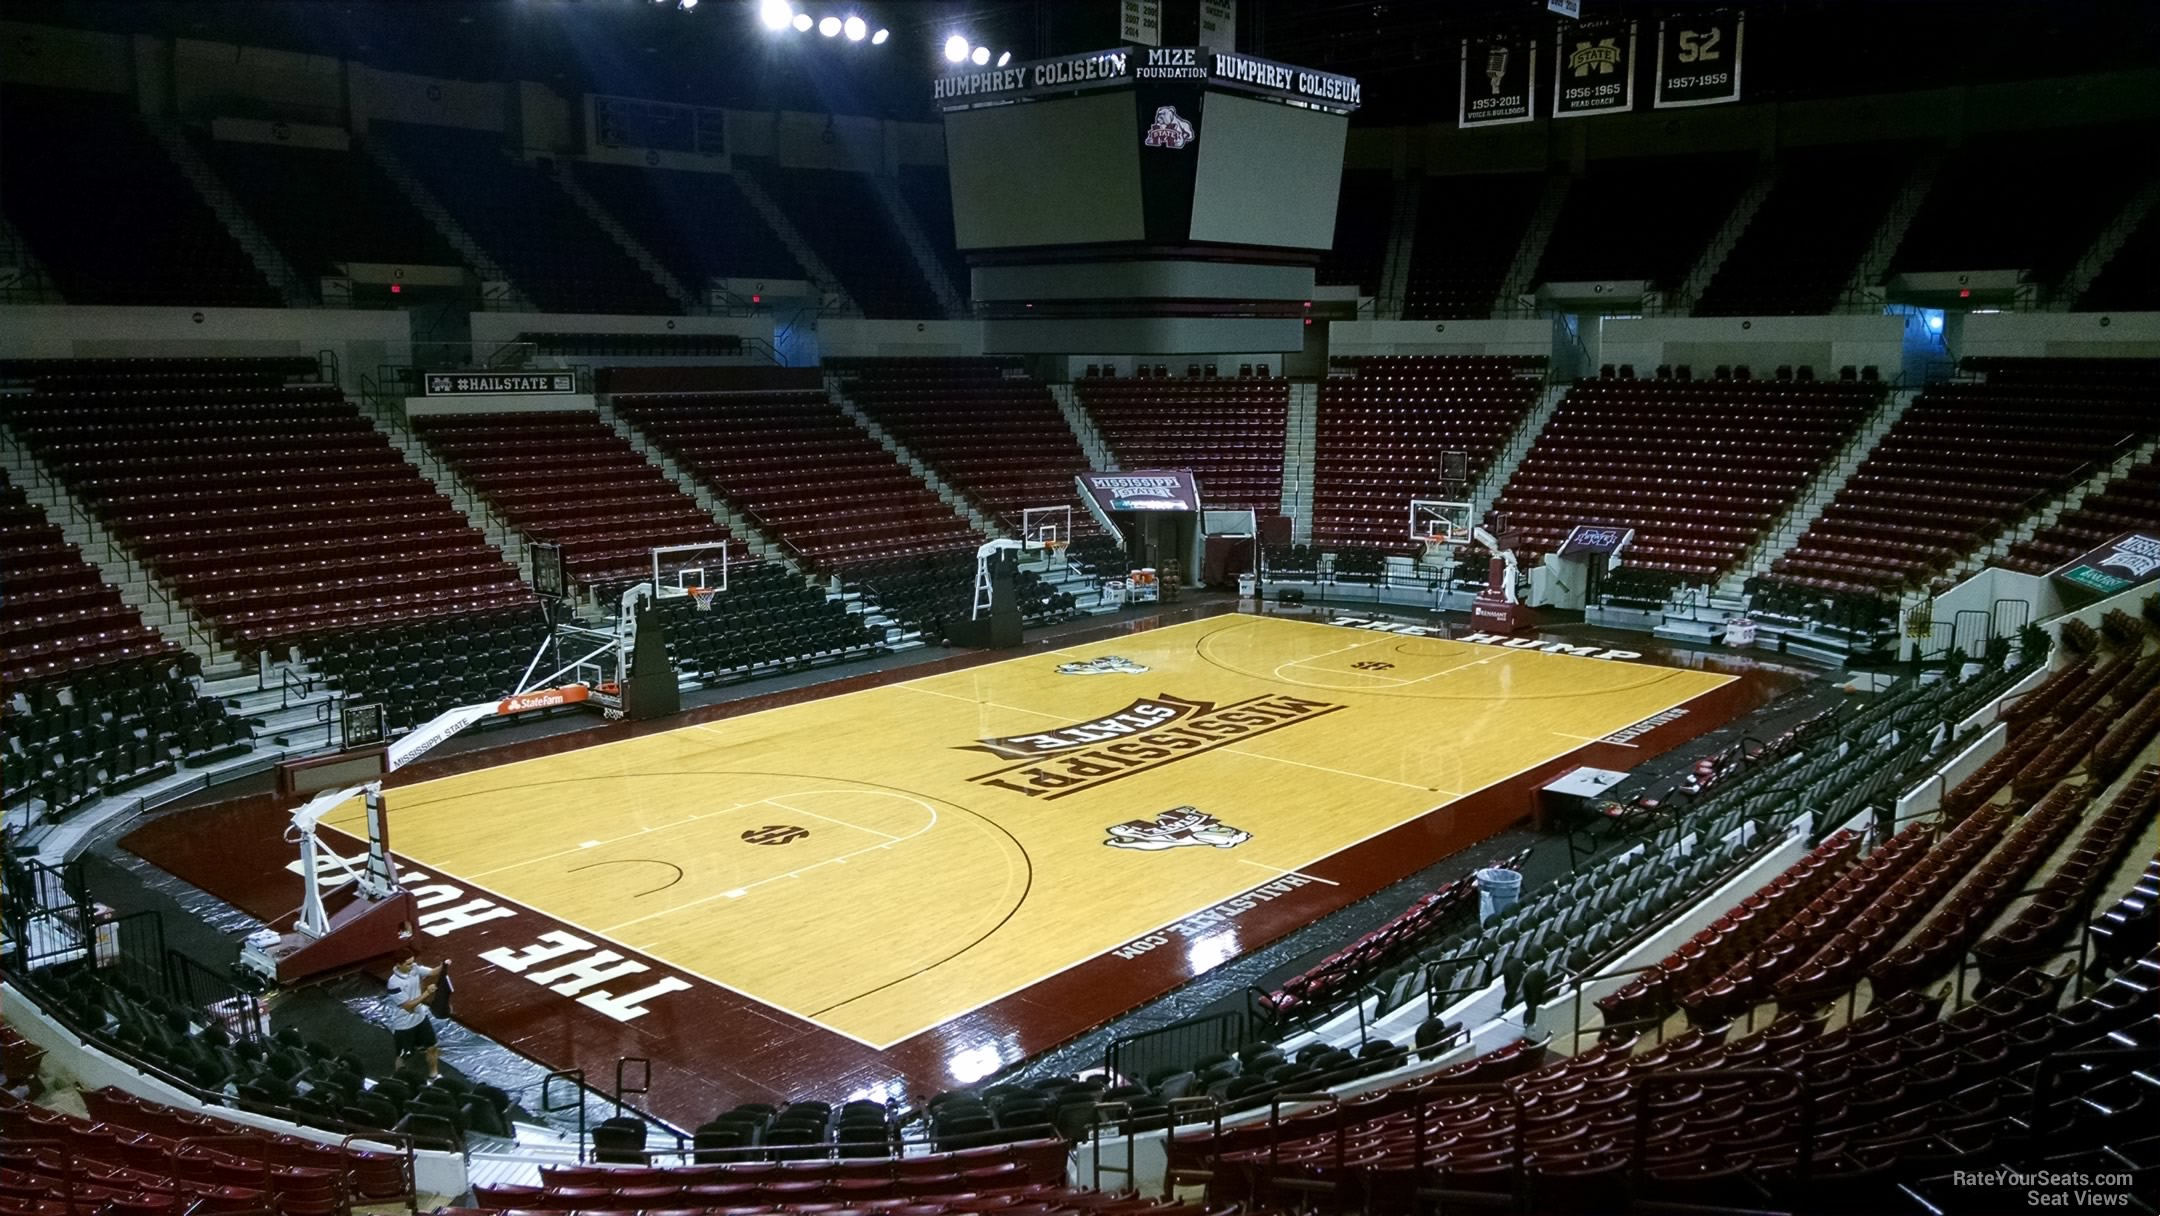 section 119, row 15 seat view  - humphrey coliseum